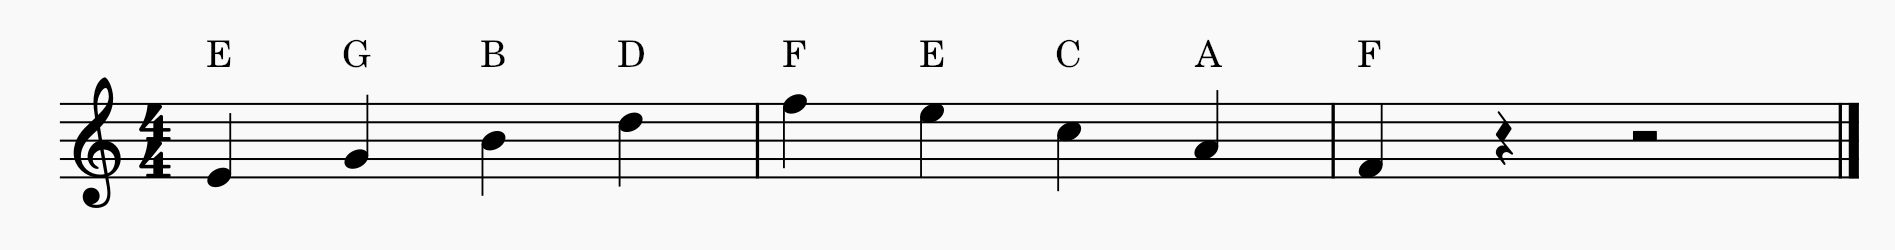 The treble clef stave